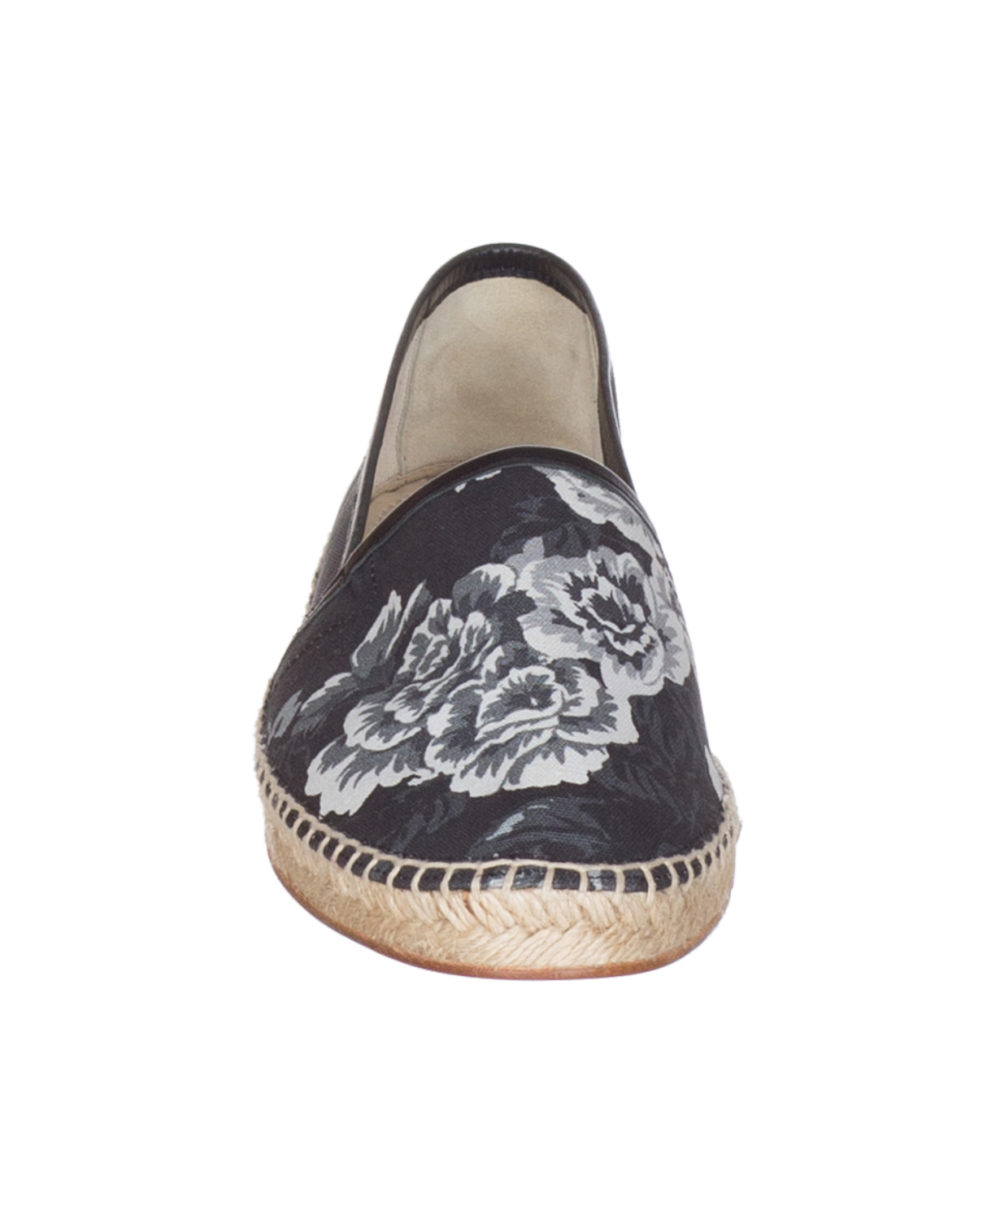 www.couturepoint.com-dolce-amp-gabbana-mens-roses-floral-print-cotton-espadrille-loafers-slip-on-shoes